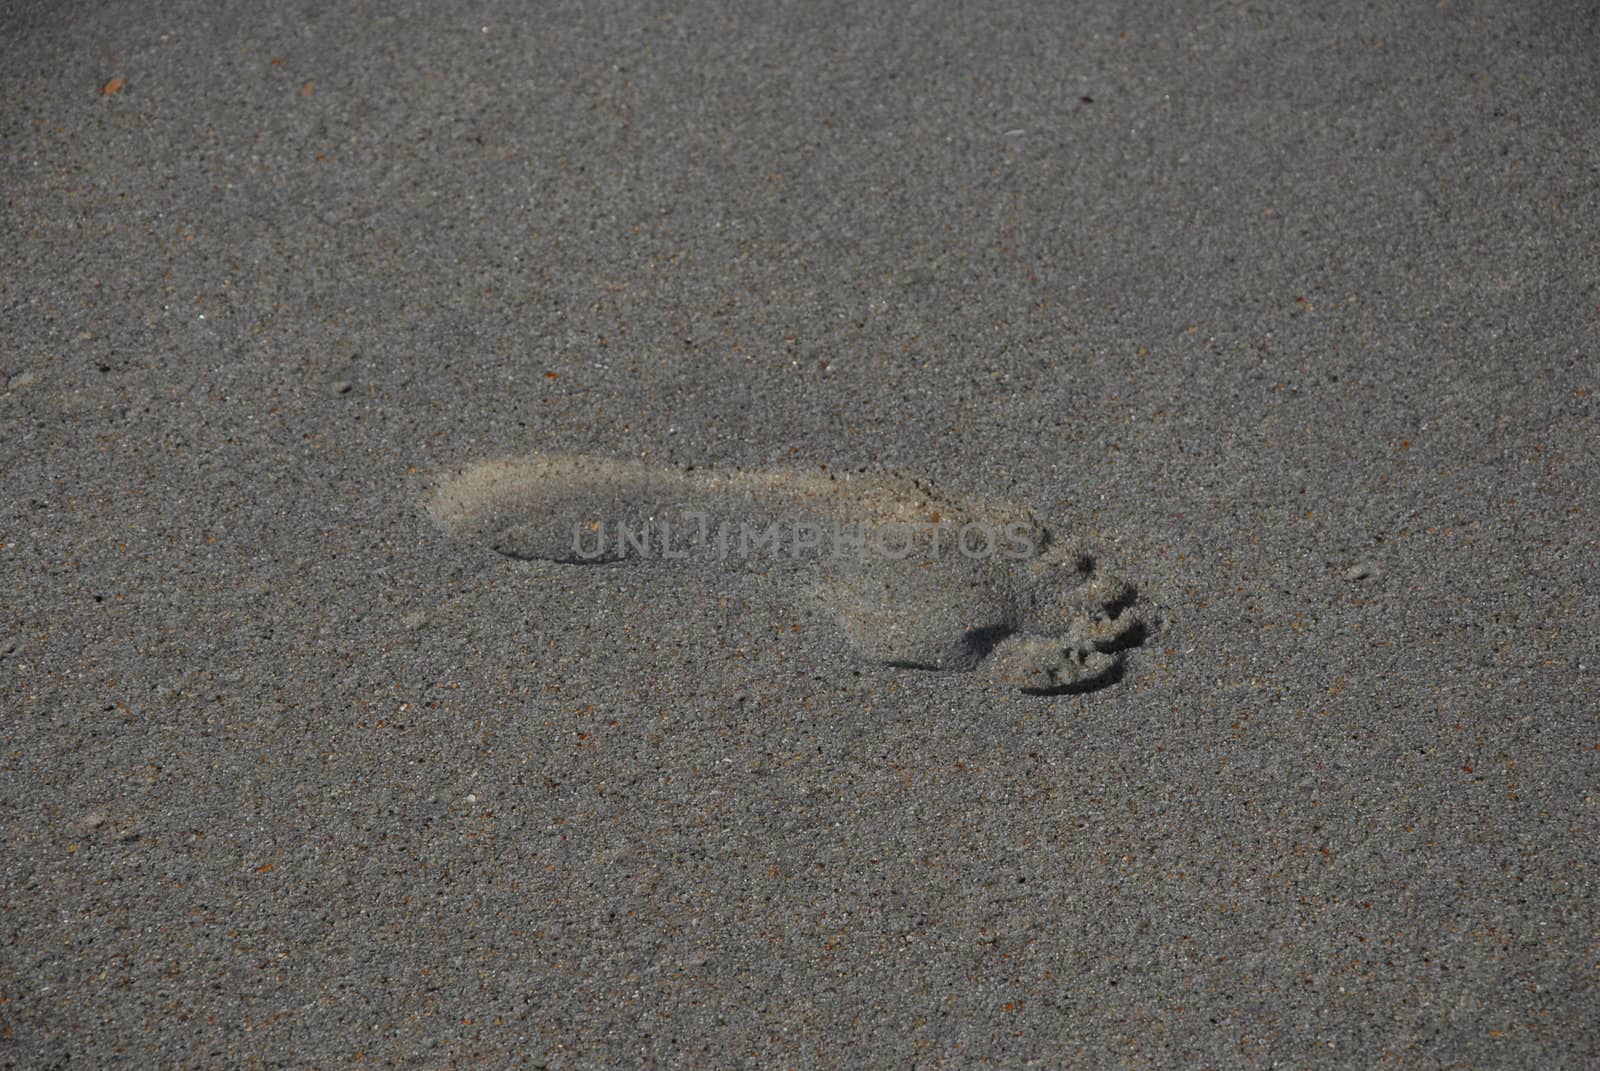 A single footprint in the sand at the beach